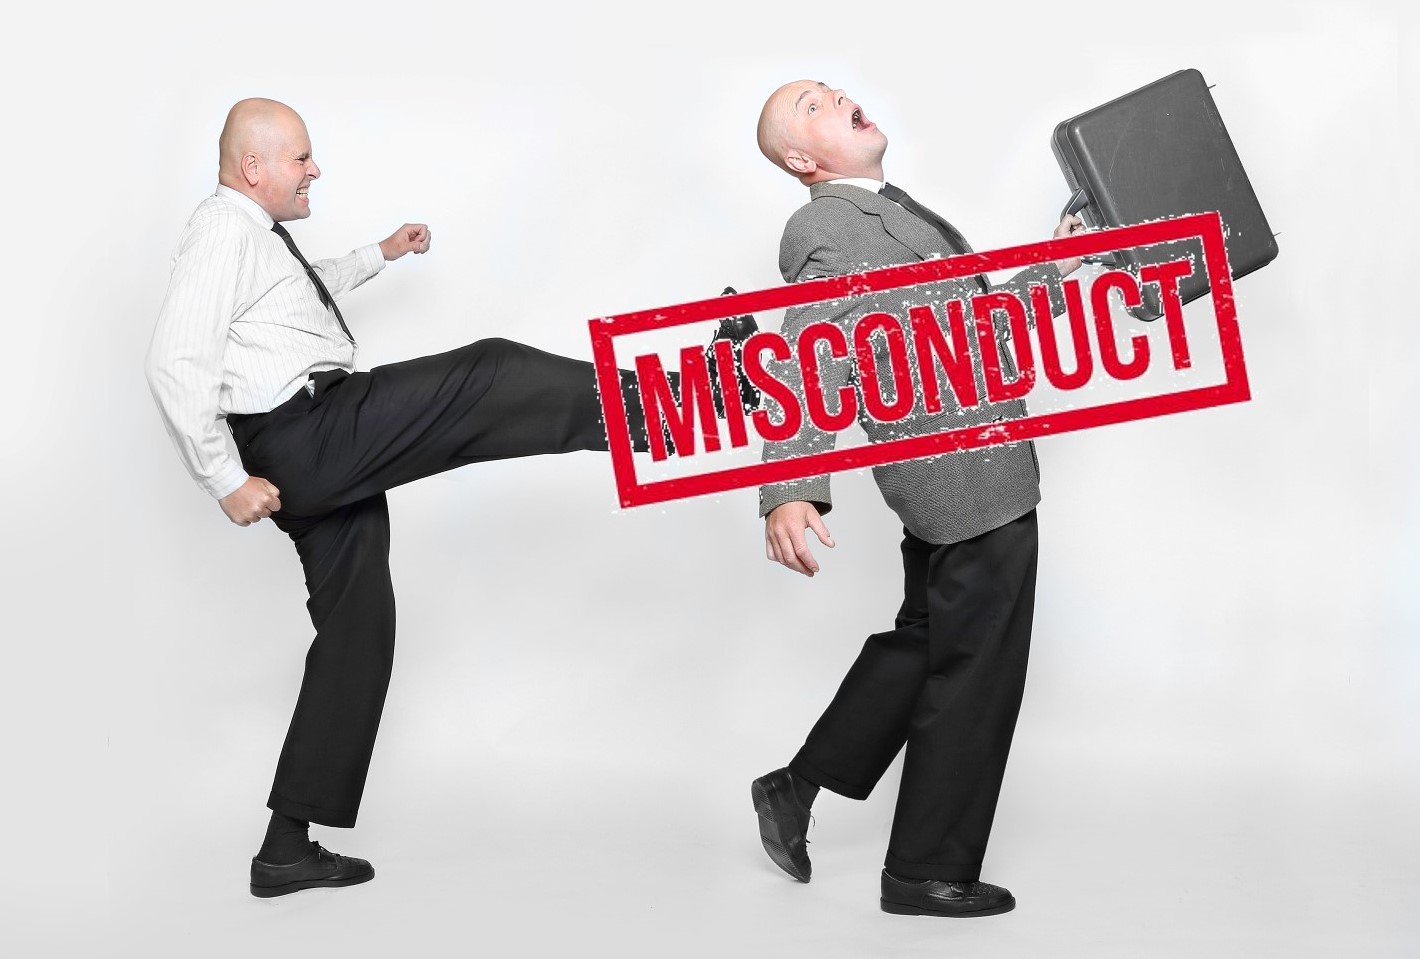 4 employee misconduct guidelines to prevent employee sue you ...